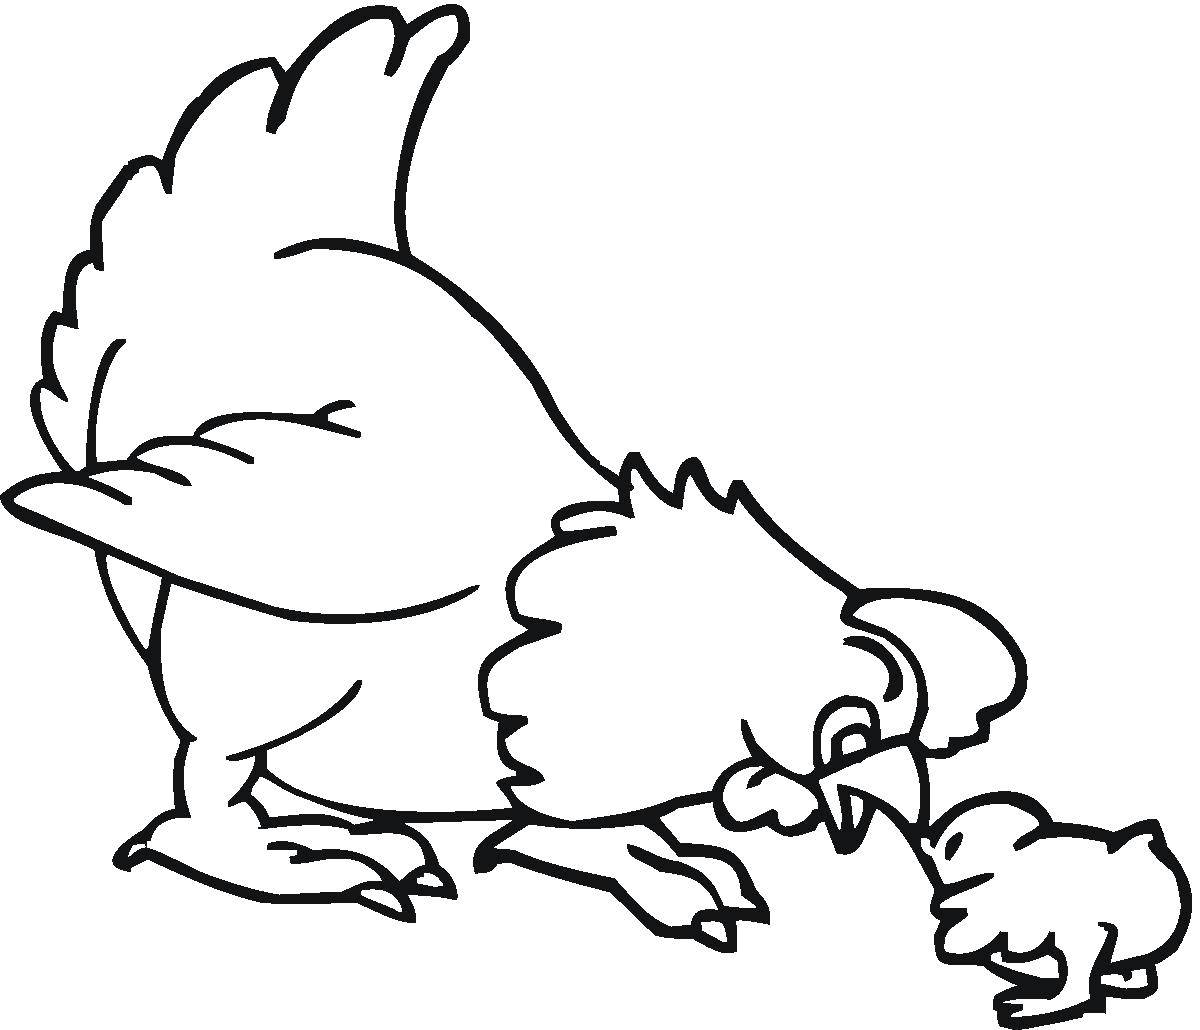 Coloring Chicken and chicken. Category mother and child. Tags:  chicken, chicken.